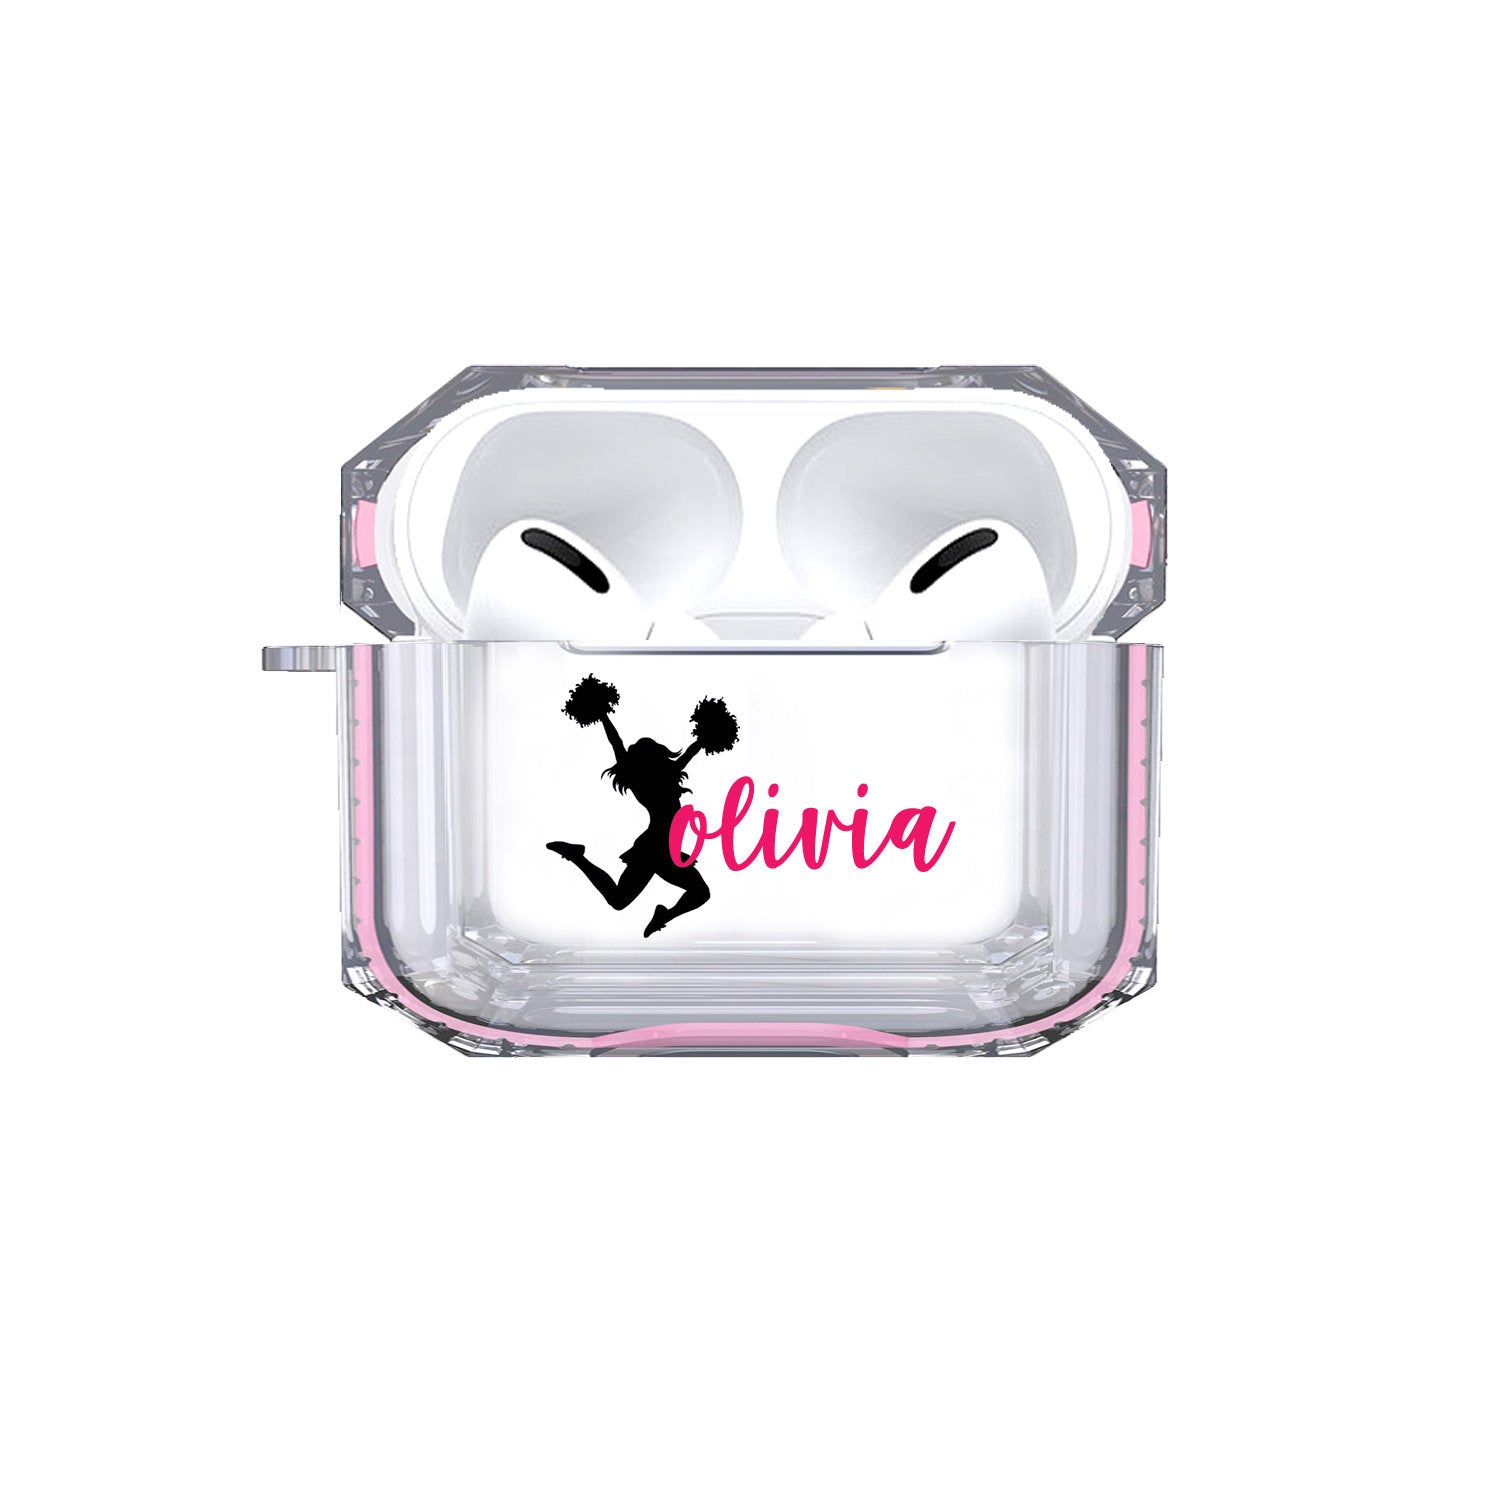 Protective Customized Sports Airpods Pro Case Cheer Name Air pod Pro Case Personalized Gift Cheerleading Cheerleader Cheer Airpod case cover